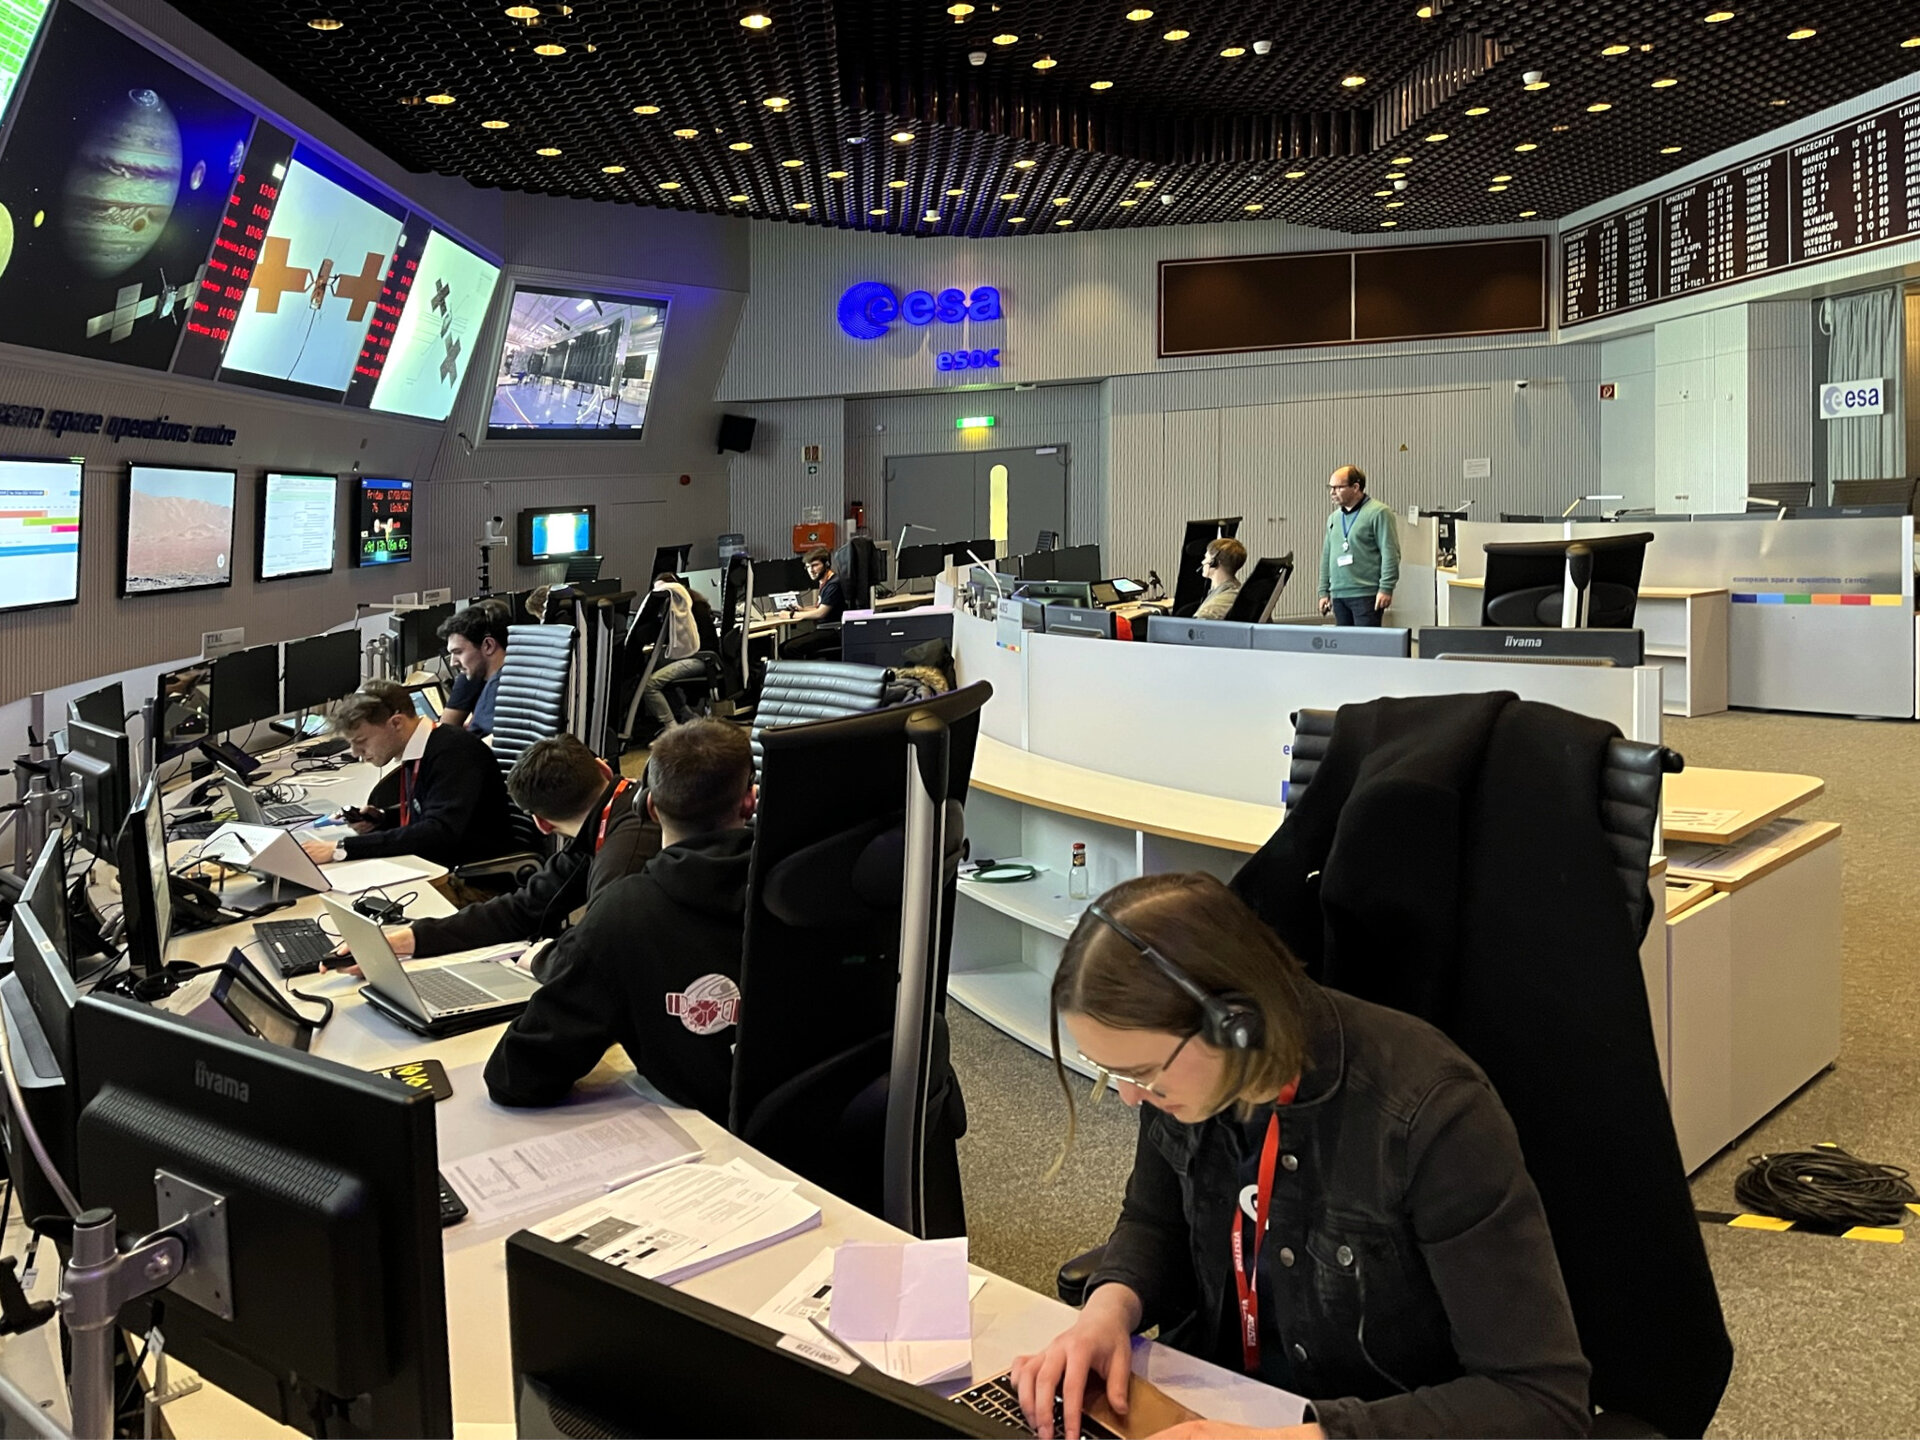 Students performing an Operations Simulation at ESOC's Mission Control Room